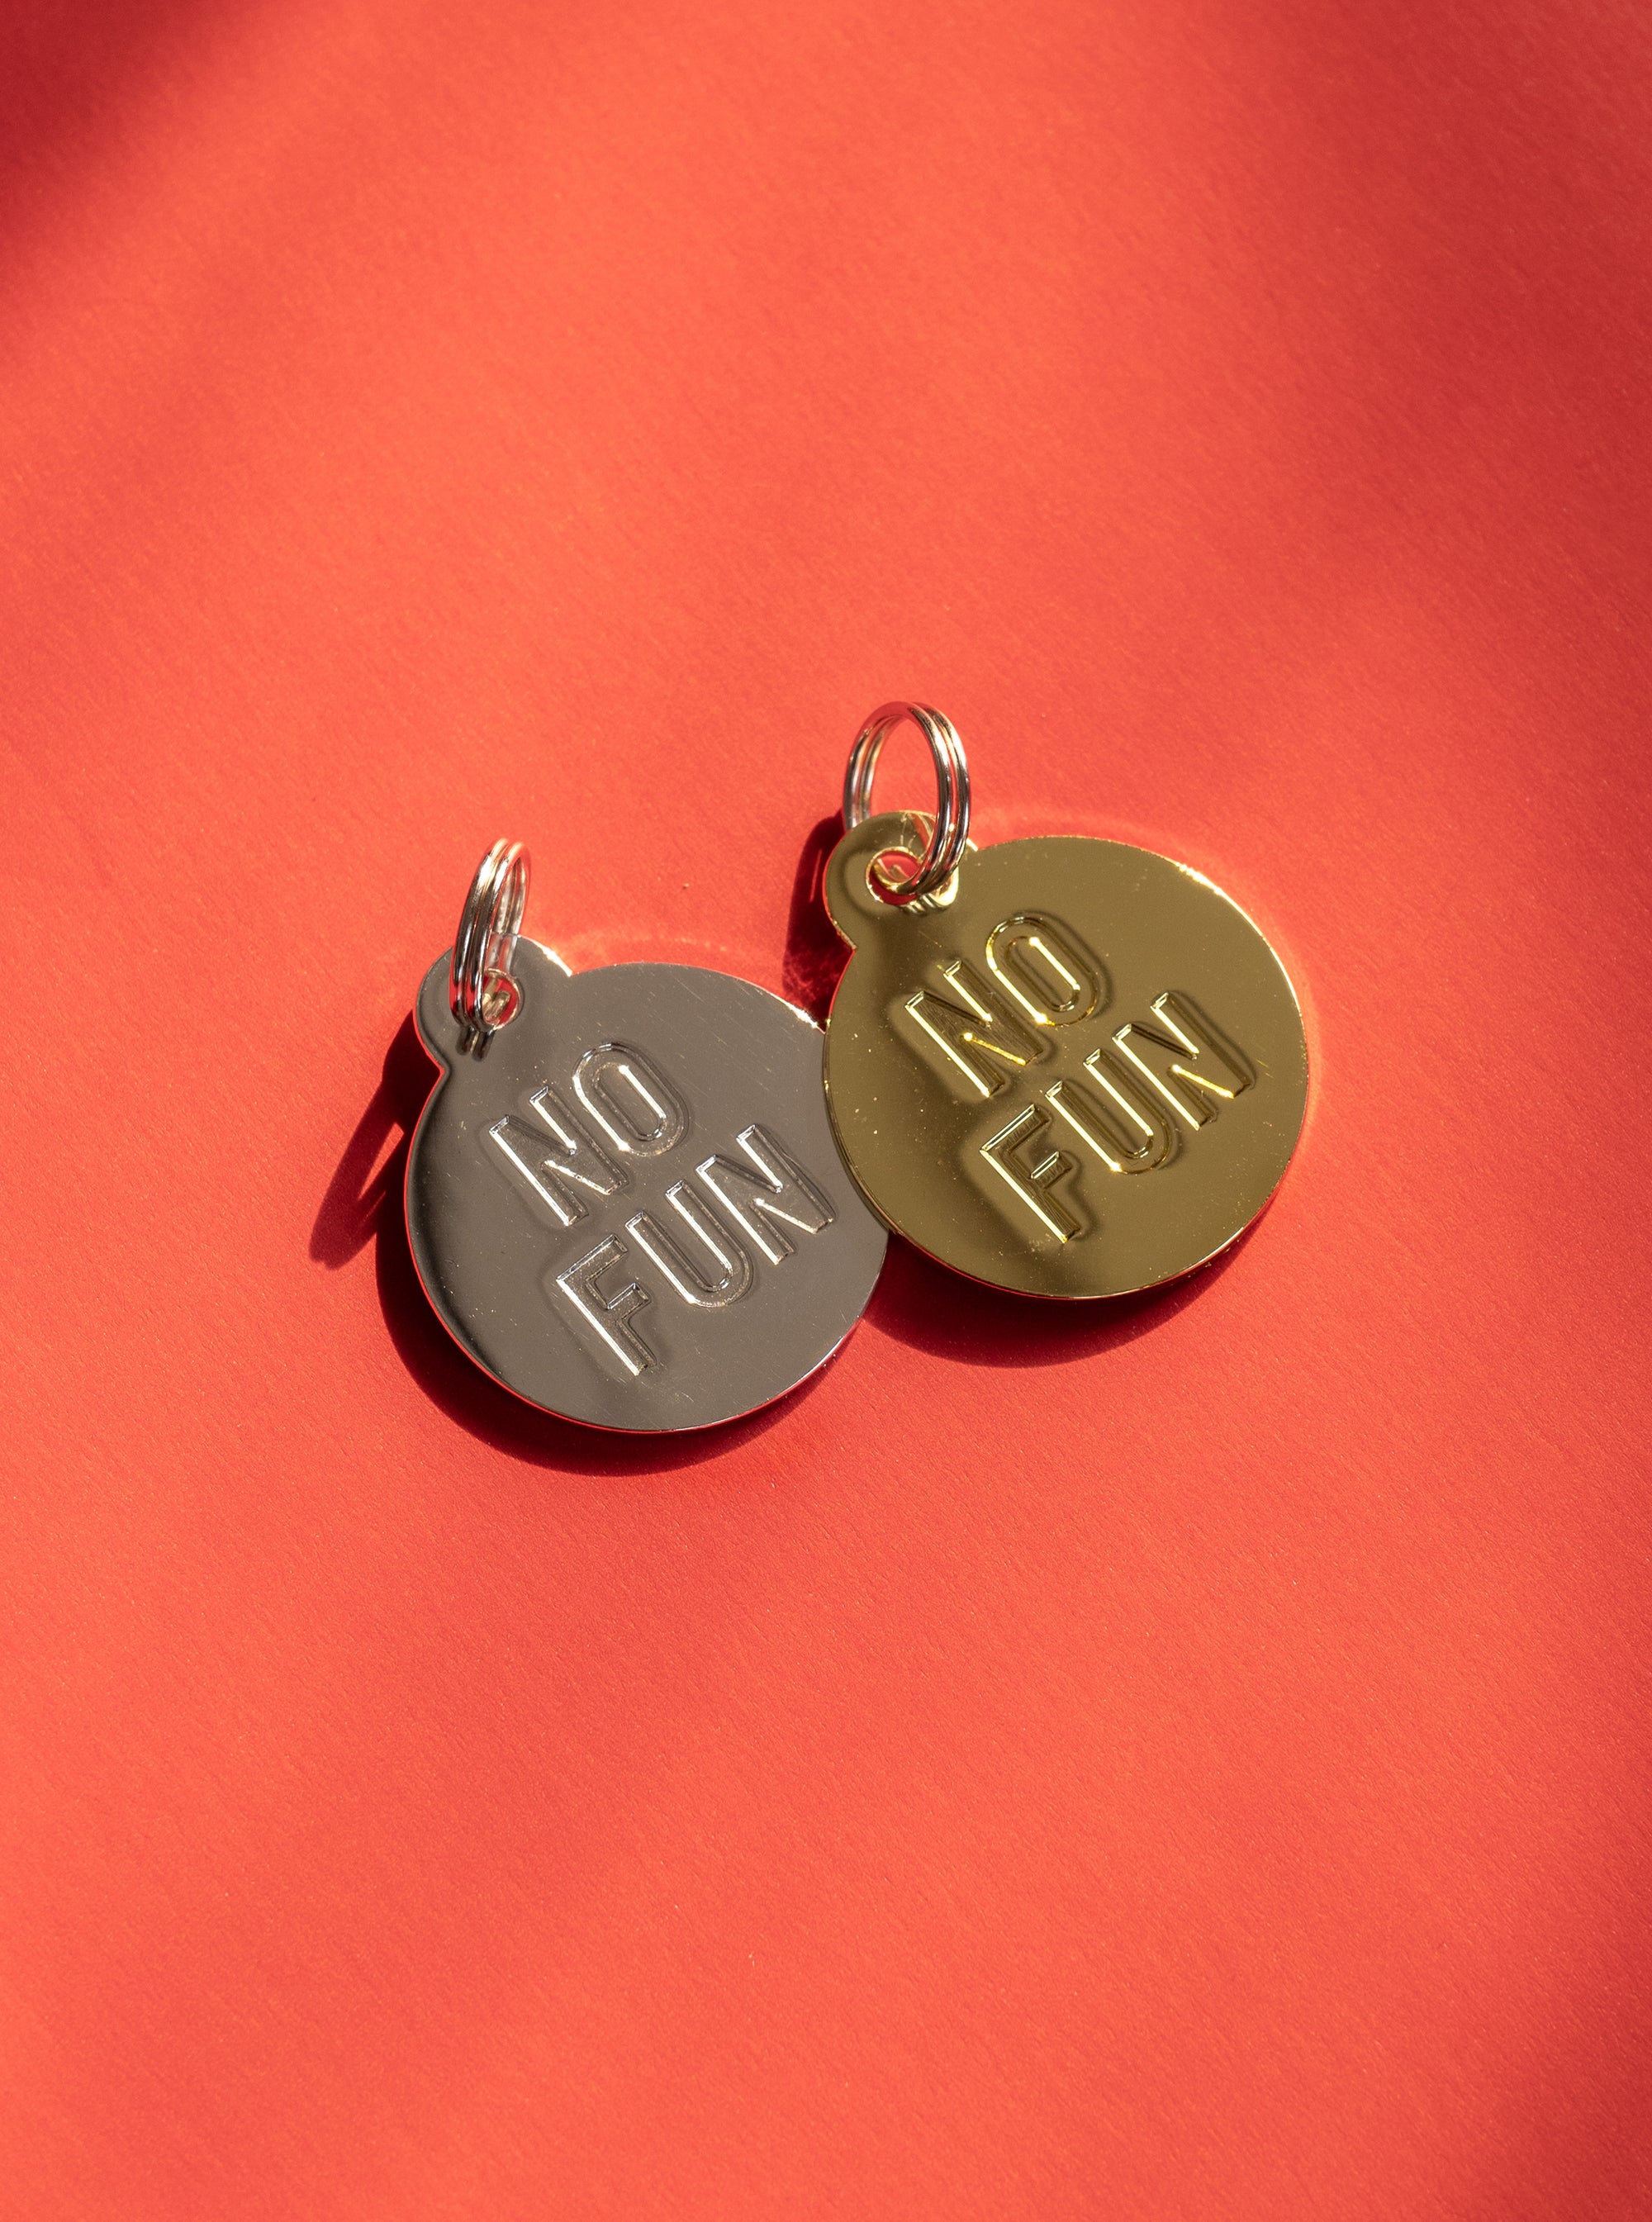 Both colours of the "No Fun®" Pet Tag Keyring against a red background.